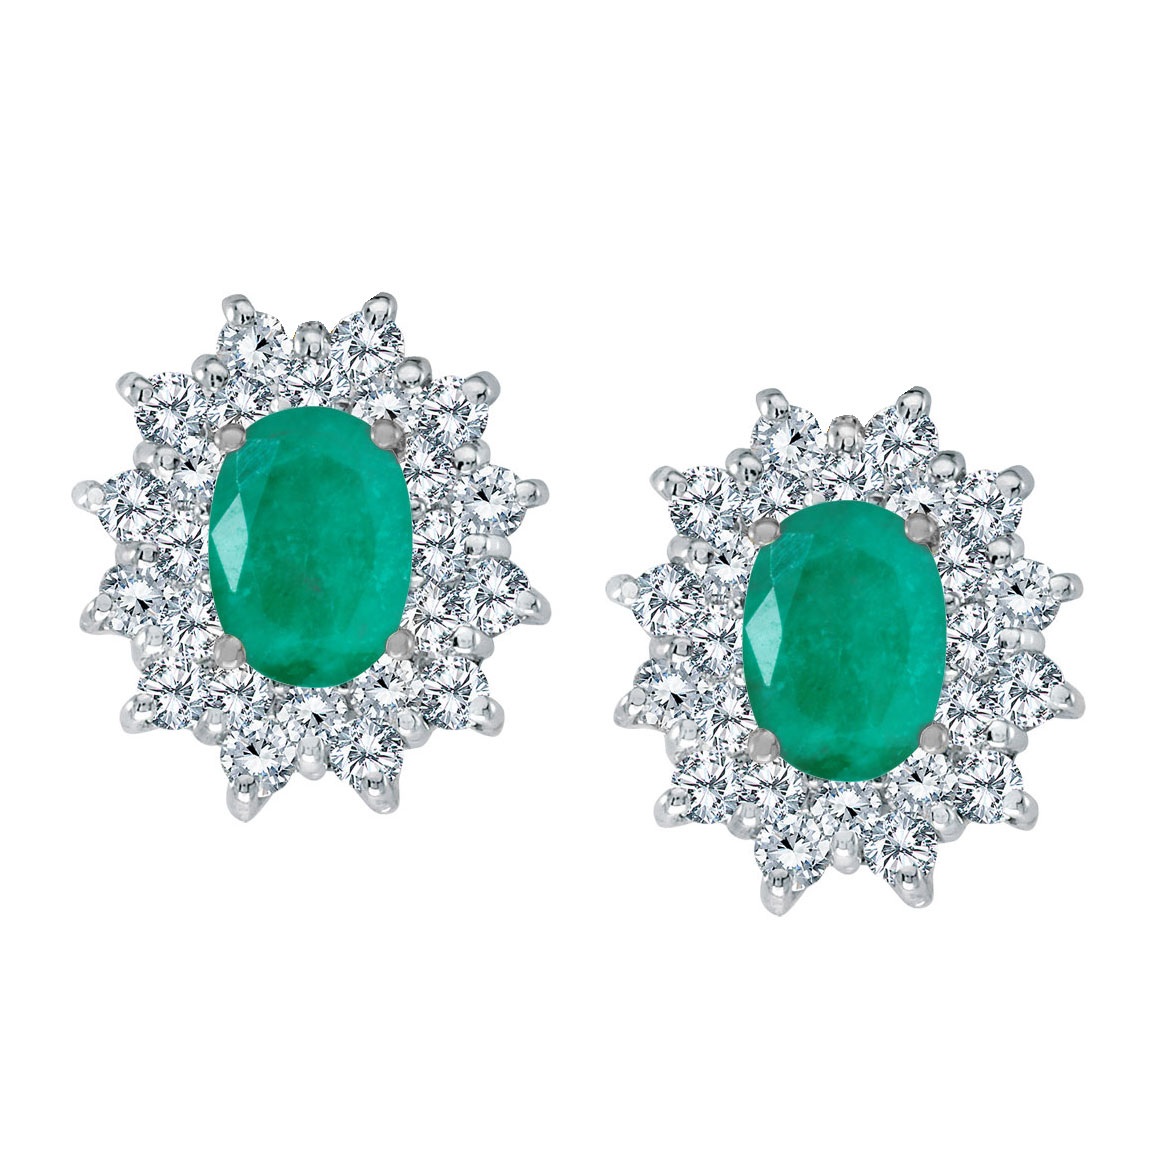 JCX2287: Bright 14k white gold earrings featuring 7x5 mm emeralds surrounded by 1.00 total carat of scintillating diamonds.